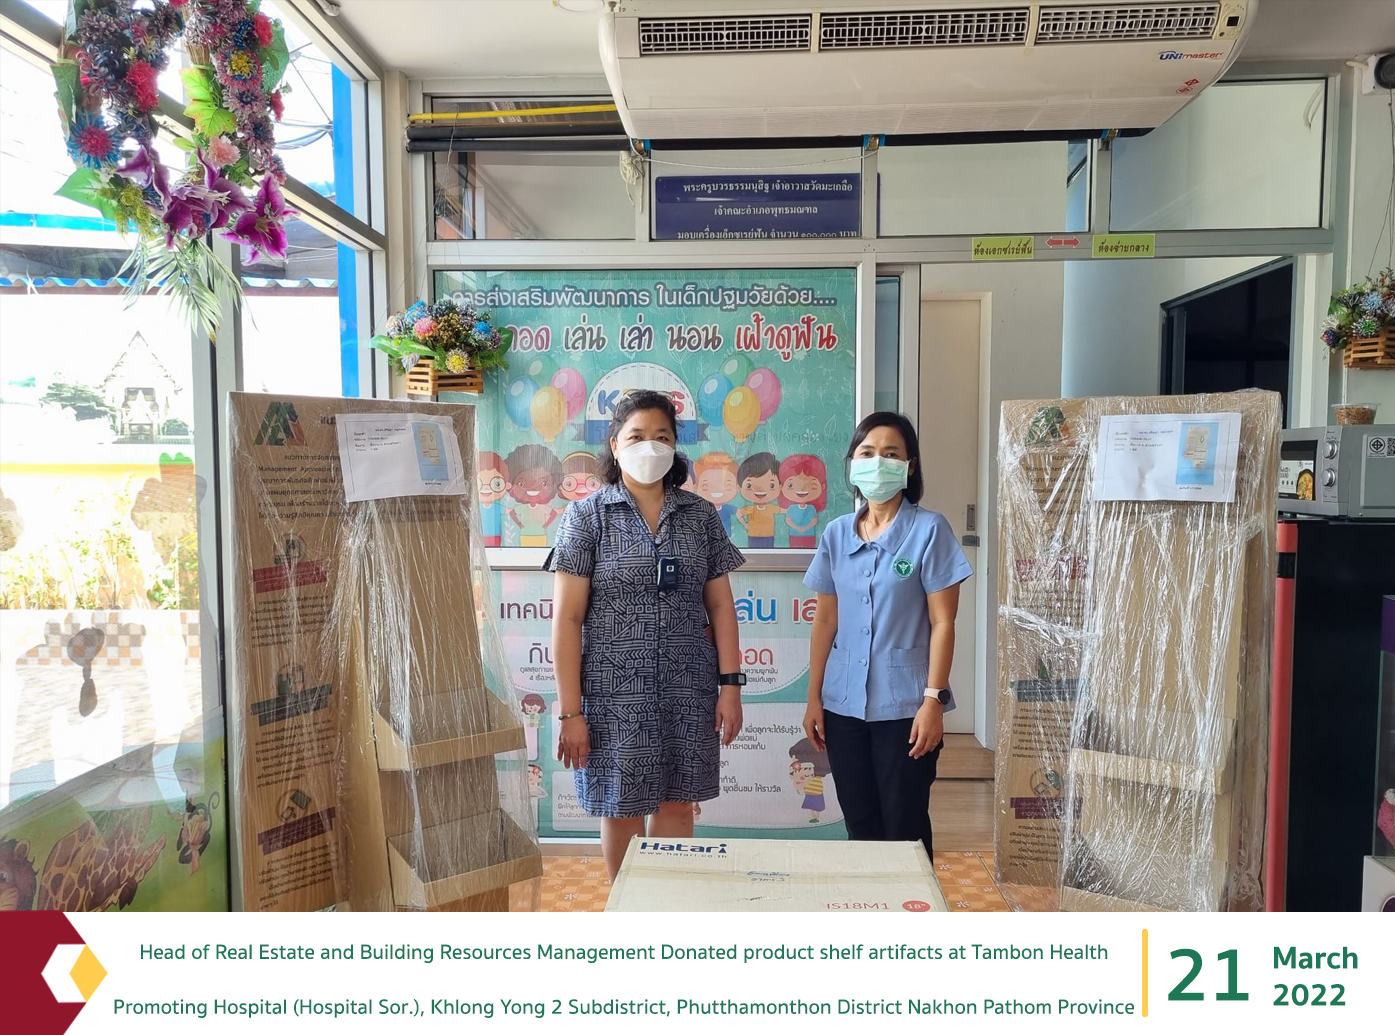 Head of Real Estate and Building Resources Management Donated product shelf artifacts at Tambon Health Promoting Hospital (Hospital Sor.), Khlong Yong 2 Subdistrict, Phutthamonthon District Nakhon Pathom Province